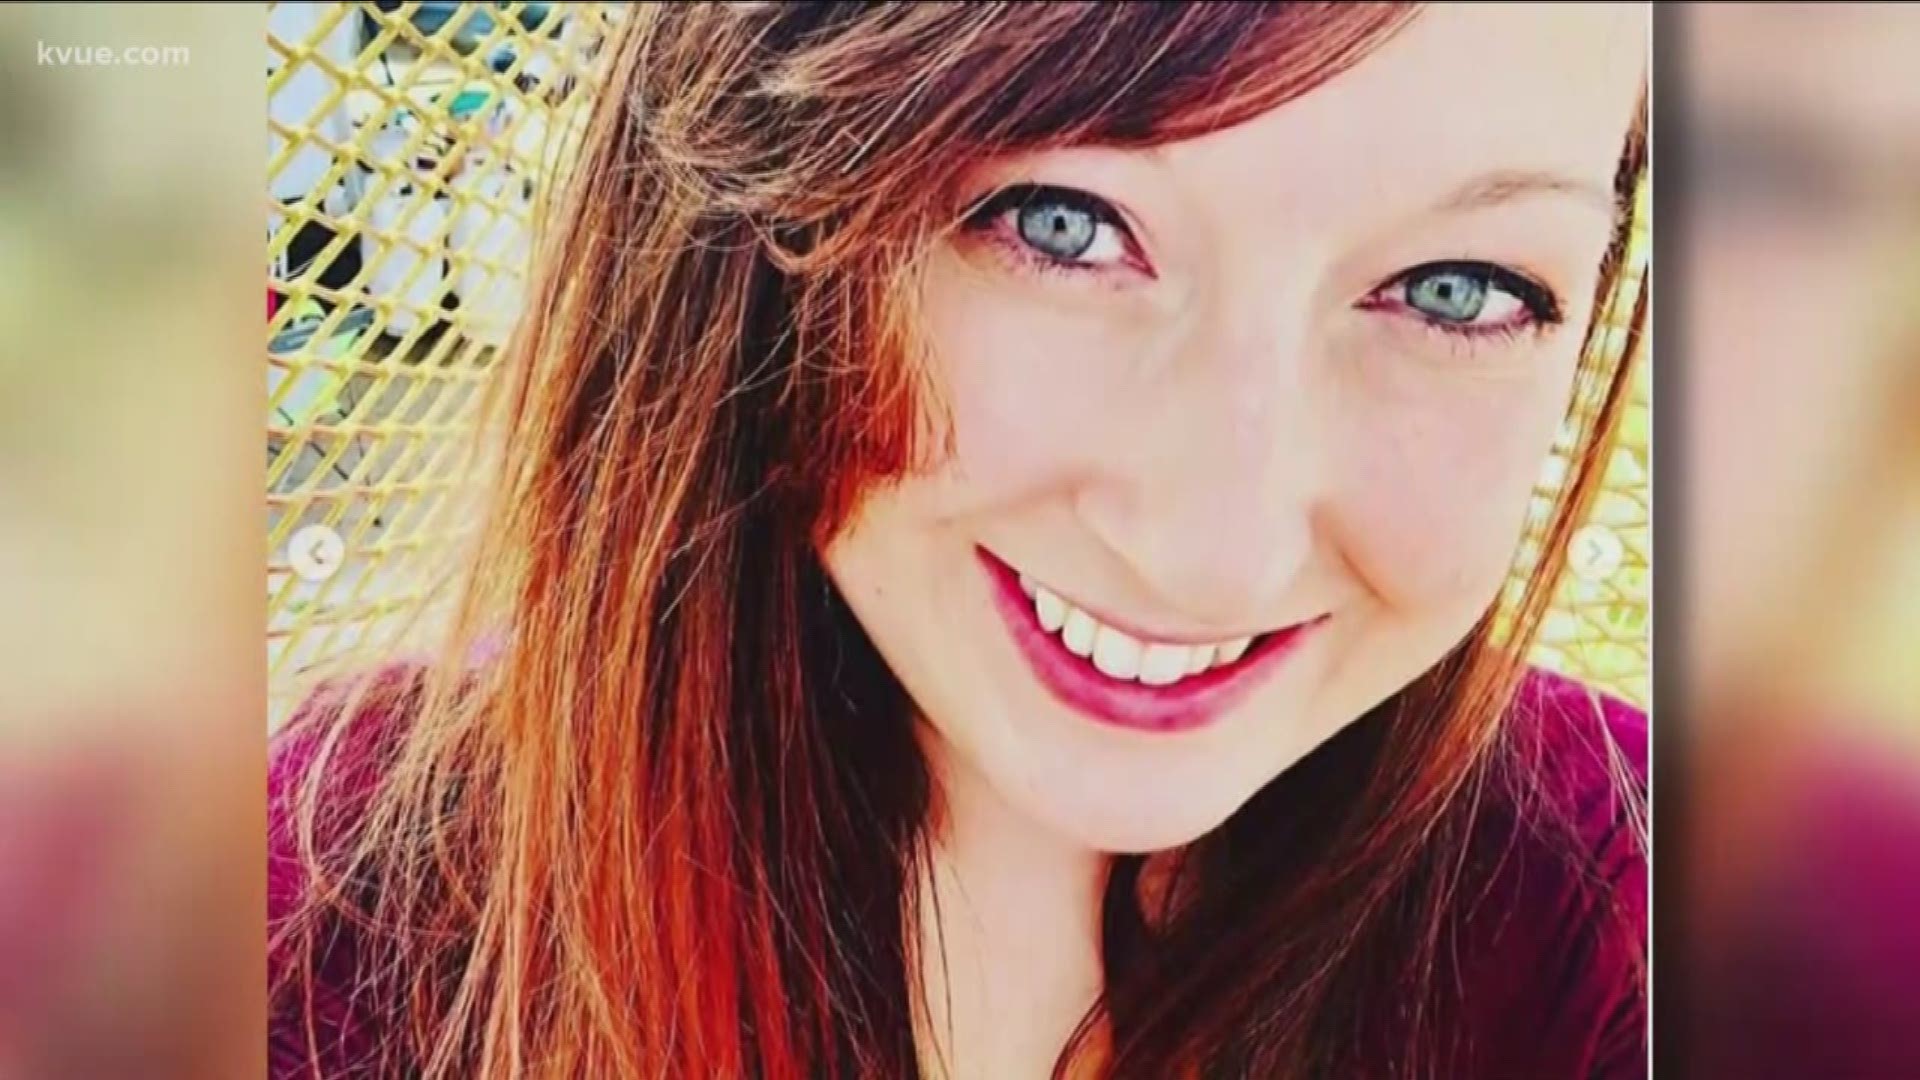 The Austin mother allegedly strangled by her so-called "best friend" is being celebrated in her hometown of Lake Charles.